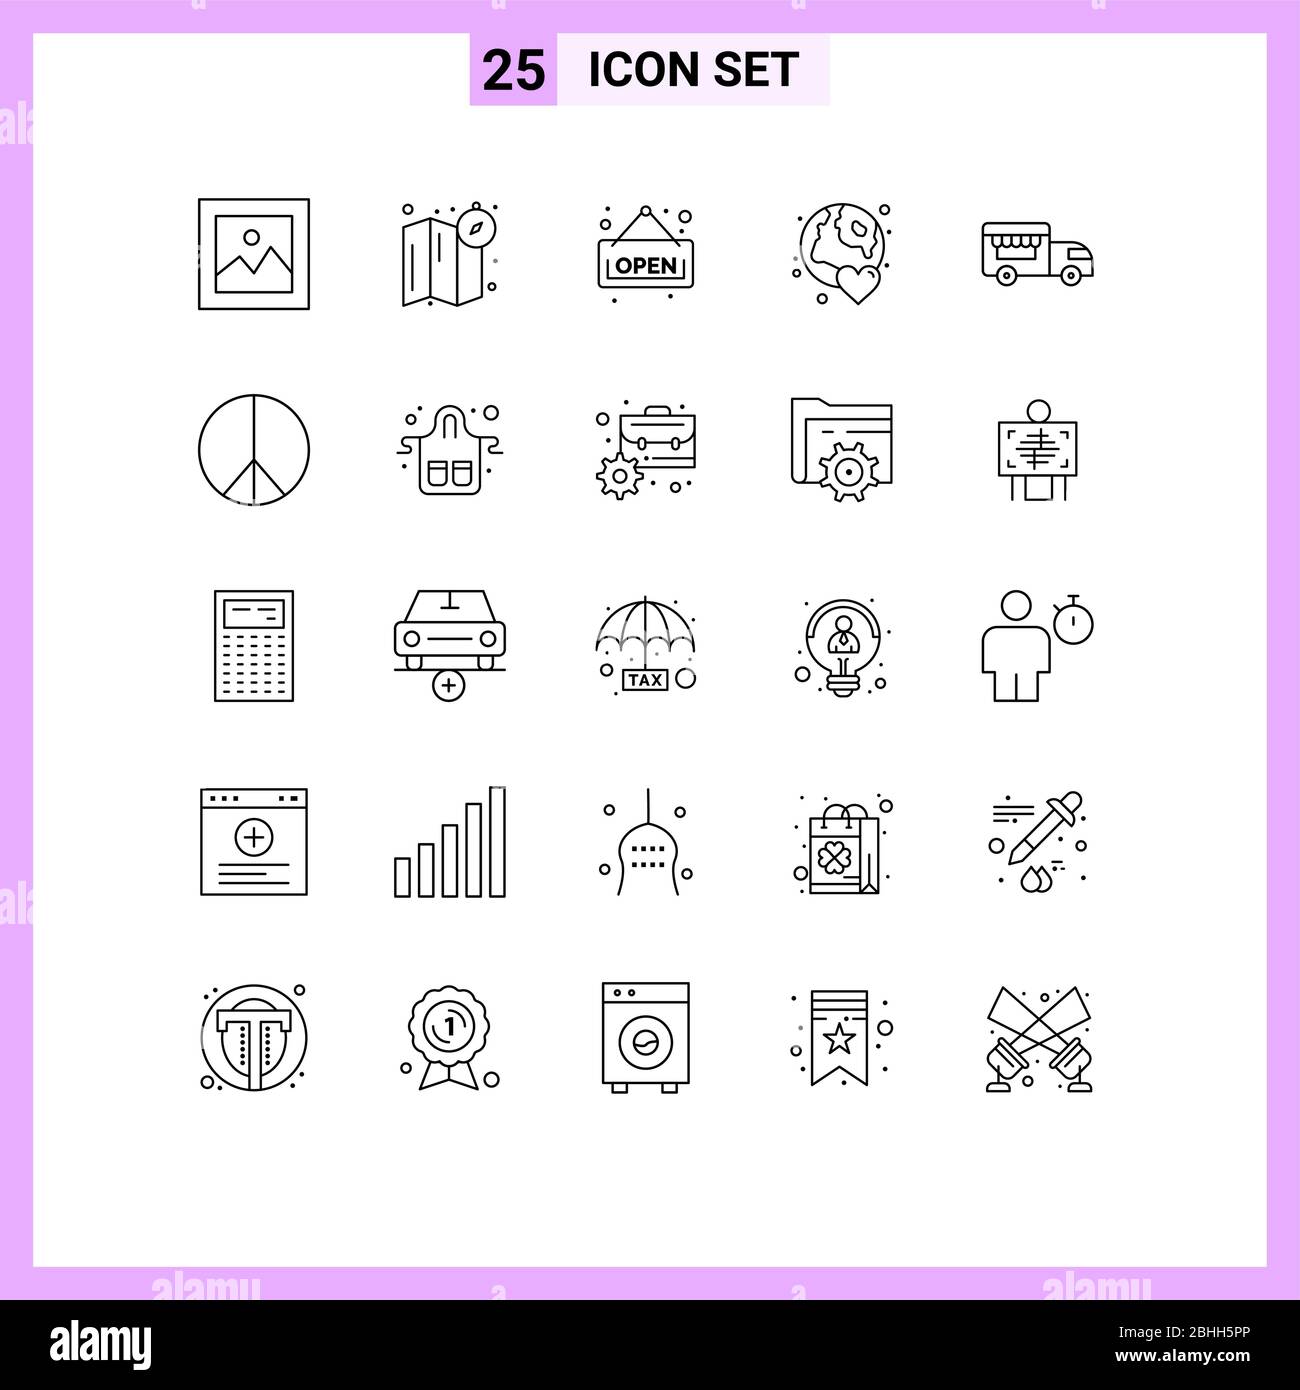 Set of 25 Modern UI Icons Symbols Signs for van, ice cream, board, day, world Editable Vector Design Elements Stock Vector